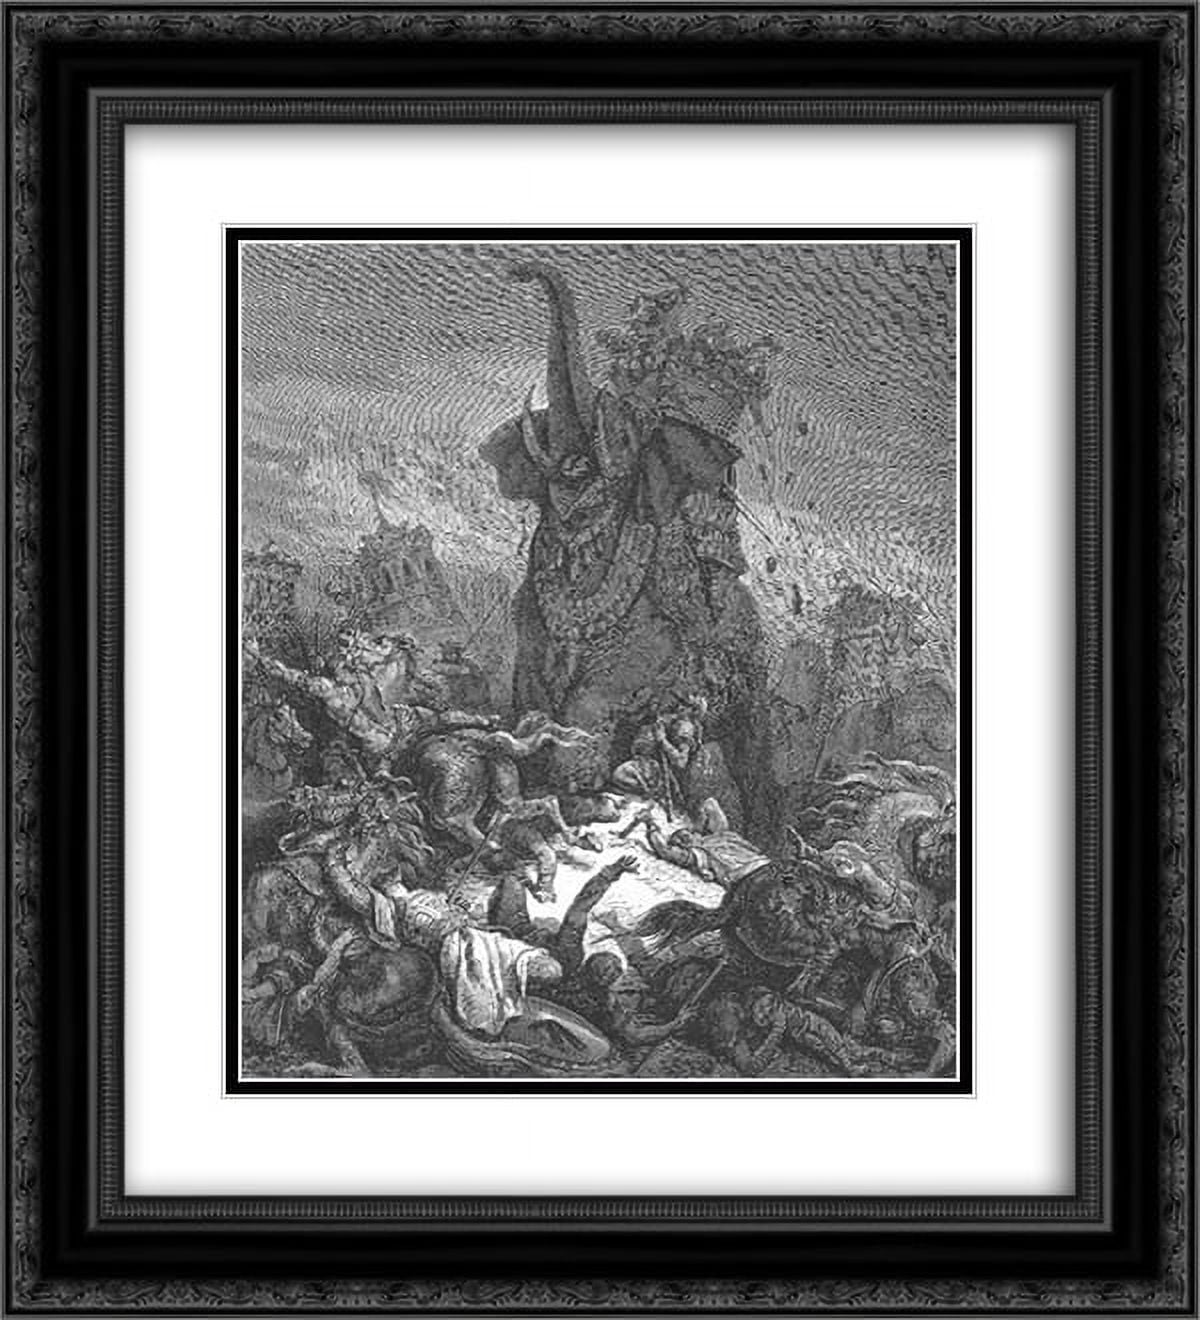 Gustave Dore 2x Matted 20x24 Black Ornate Framed Art Print The Death